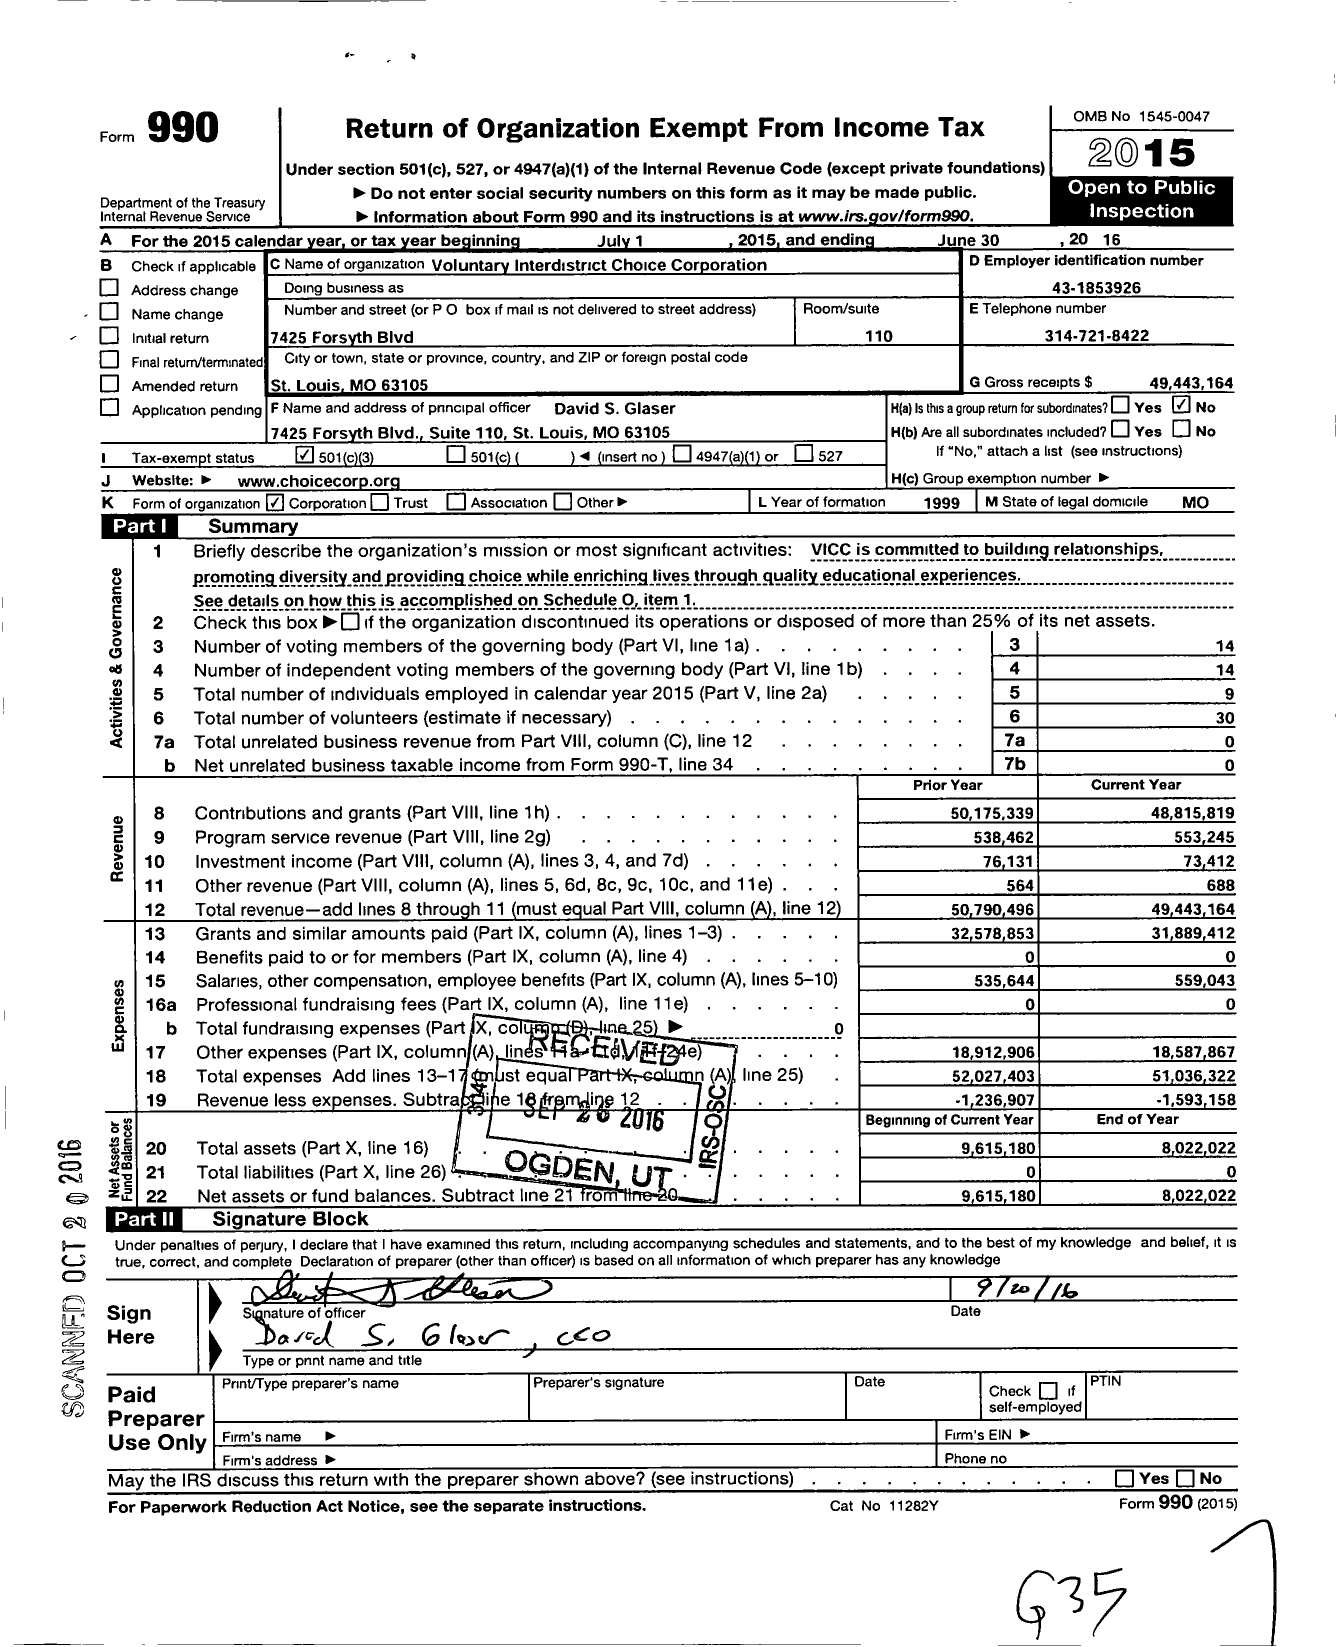 Image of first page of 2015 Form 990 for Voluntary Interdistrict Choice Corporation